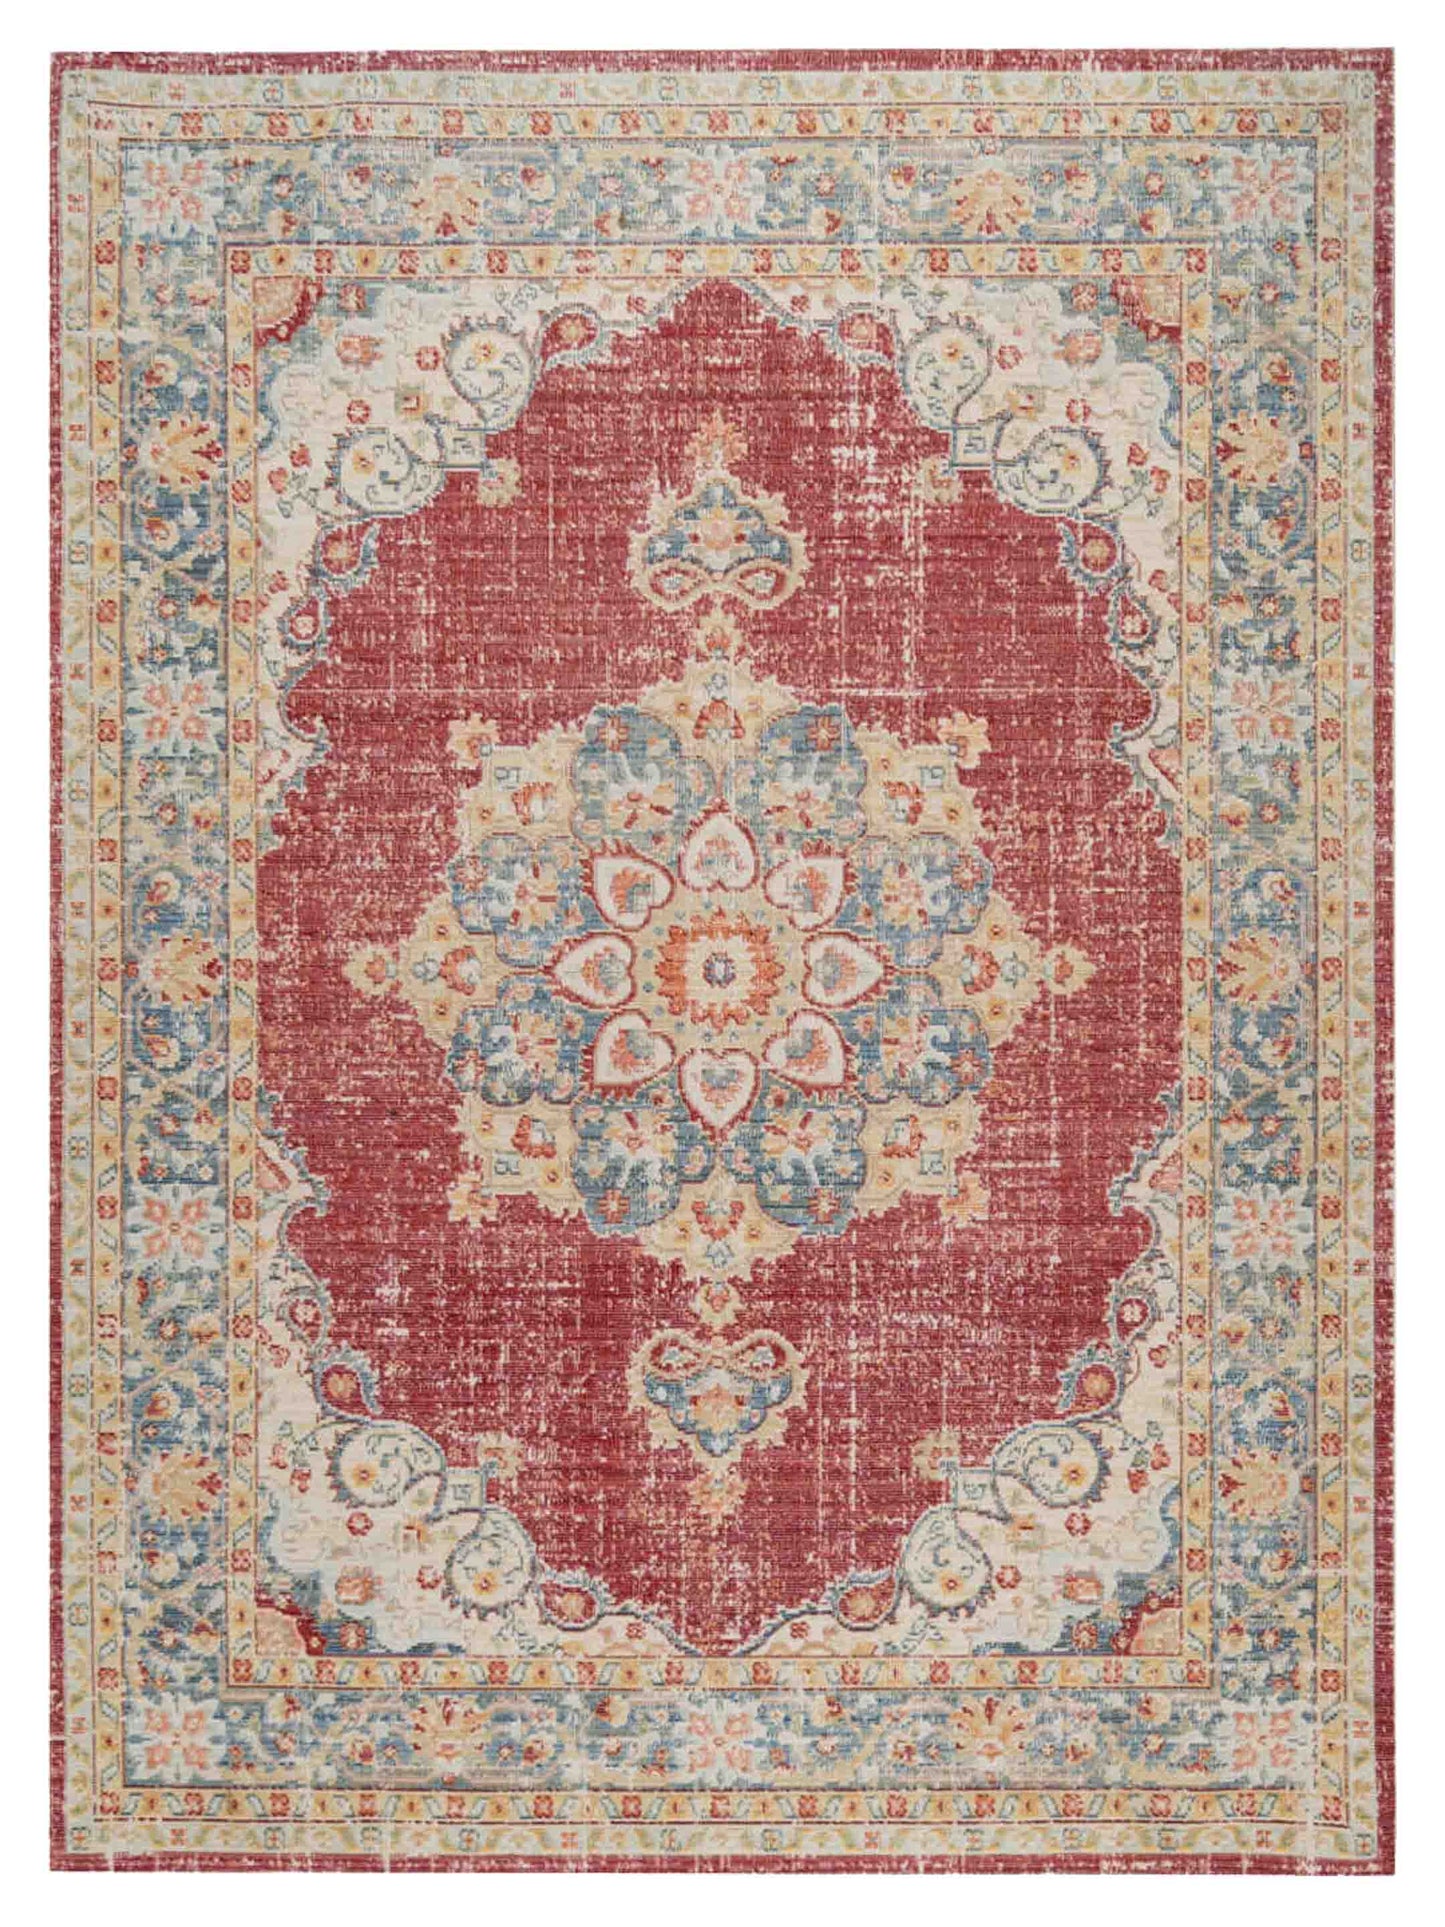 Limited Odeya OR-807 BURGUNDY RED Traditional Machinemade Rug